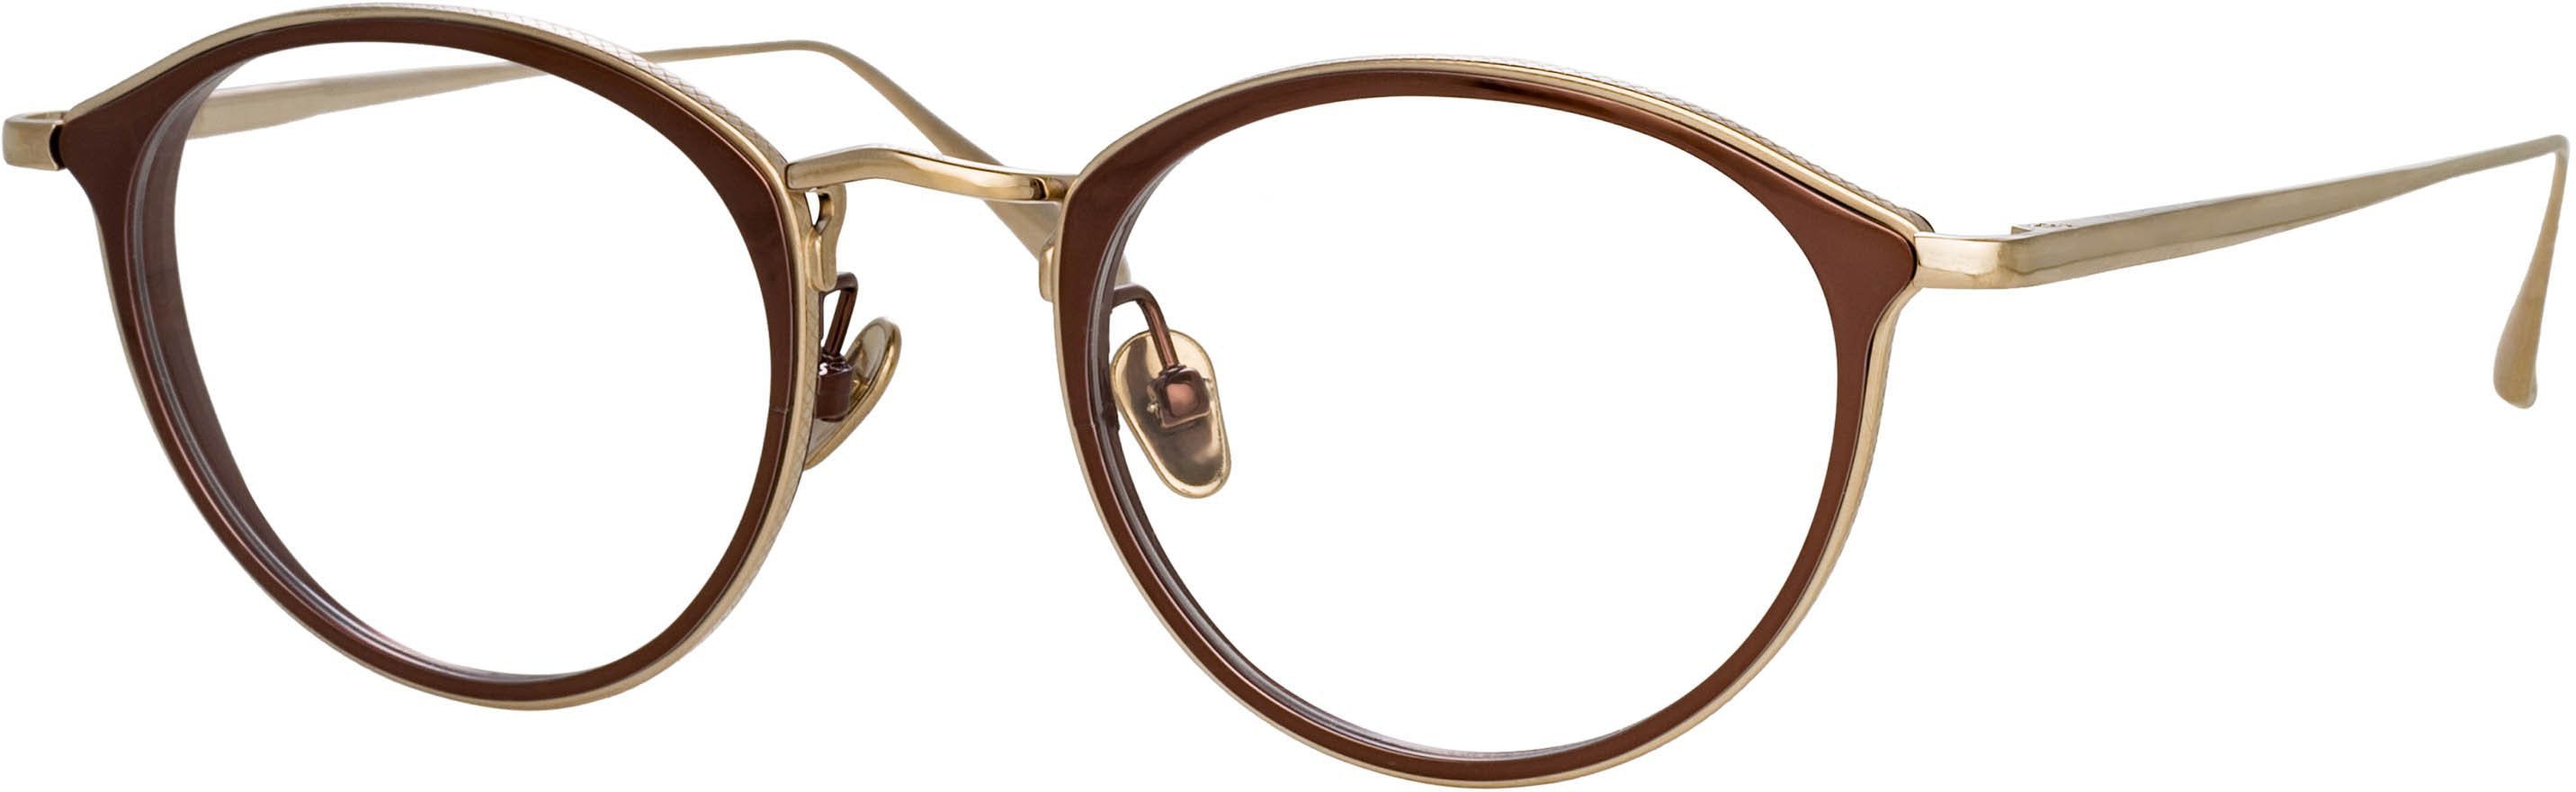 Color_LFL1224C2OPT - Luis Oval Optical Frame in White Gold and Black